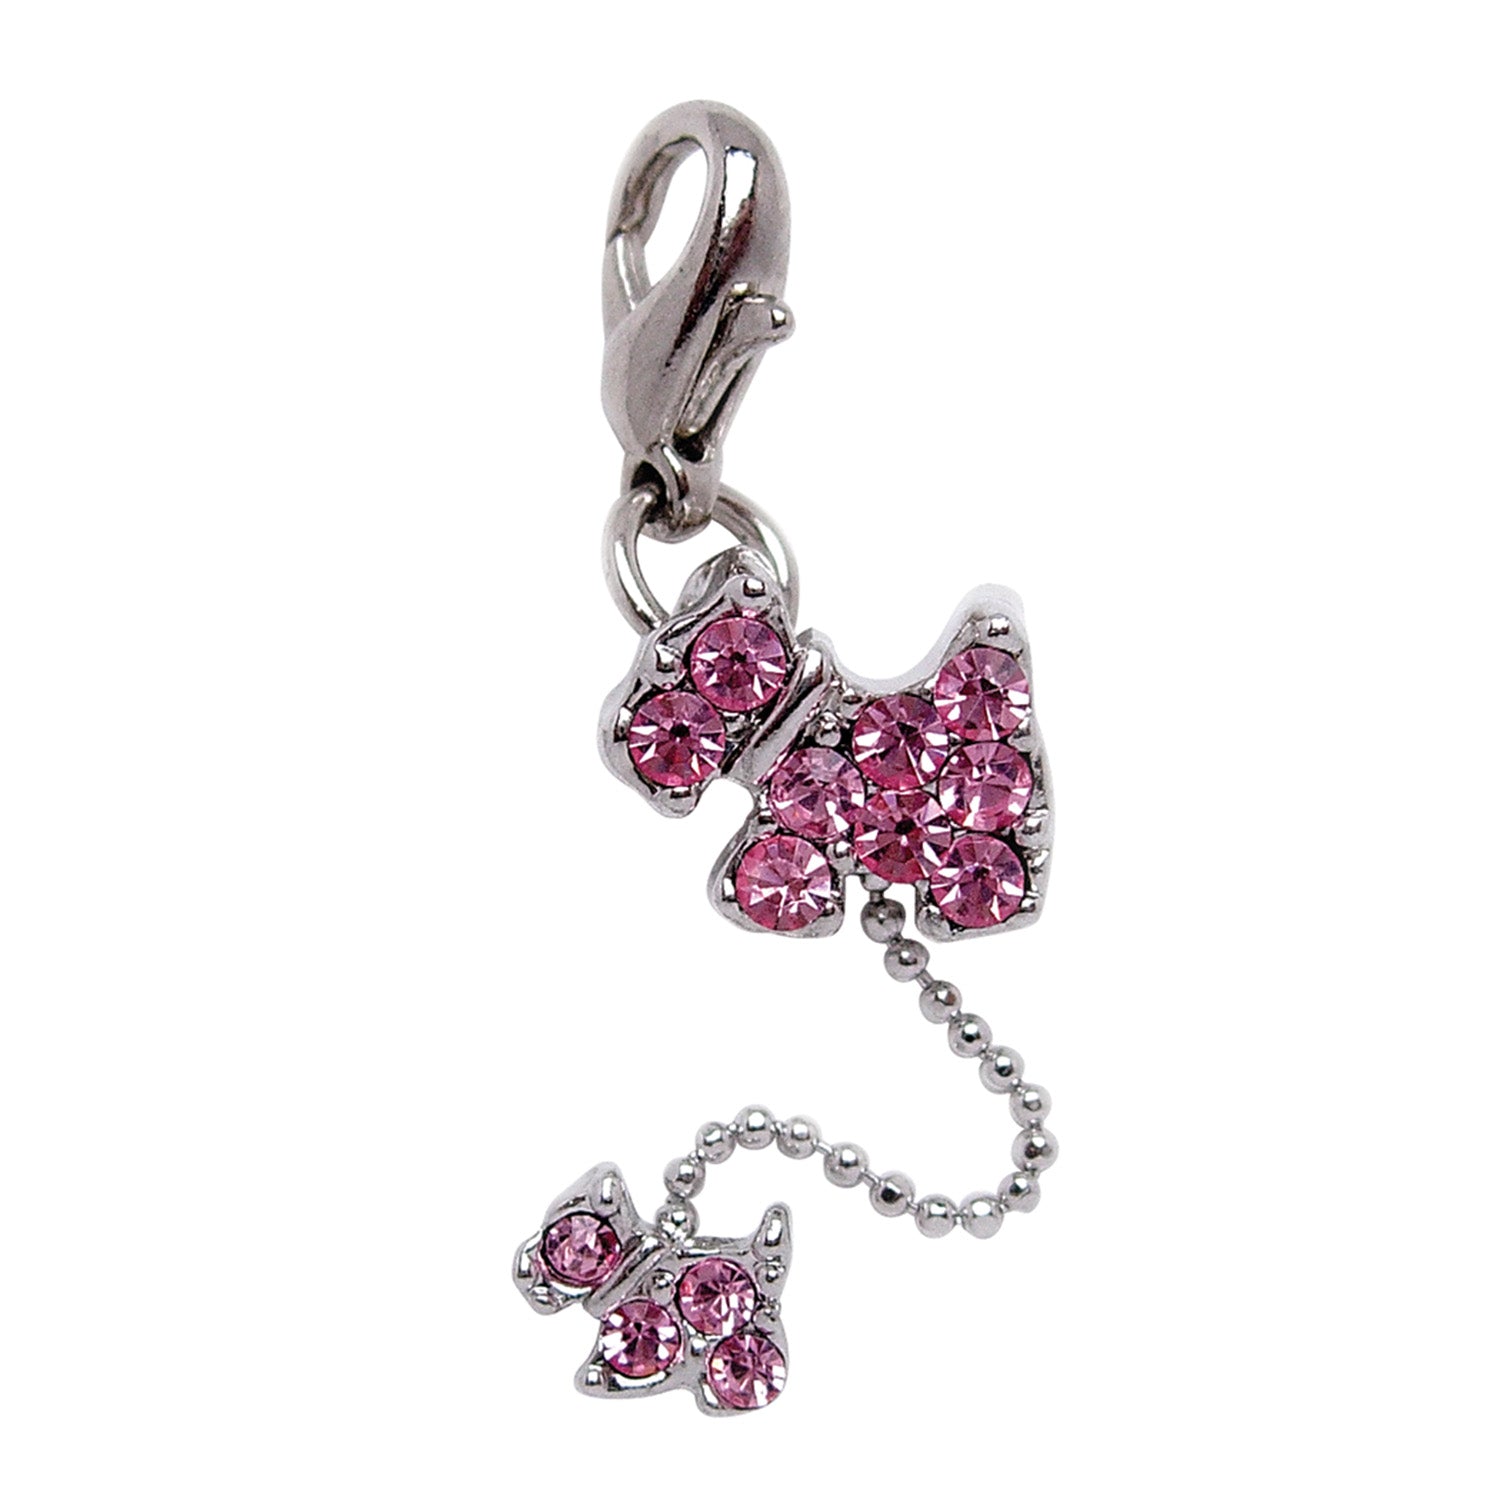 Dog and Puppy Charm with PINK Rhinestones